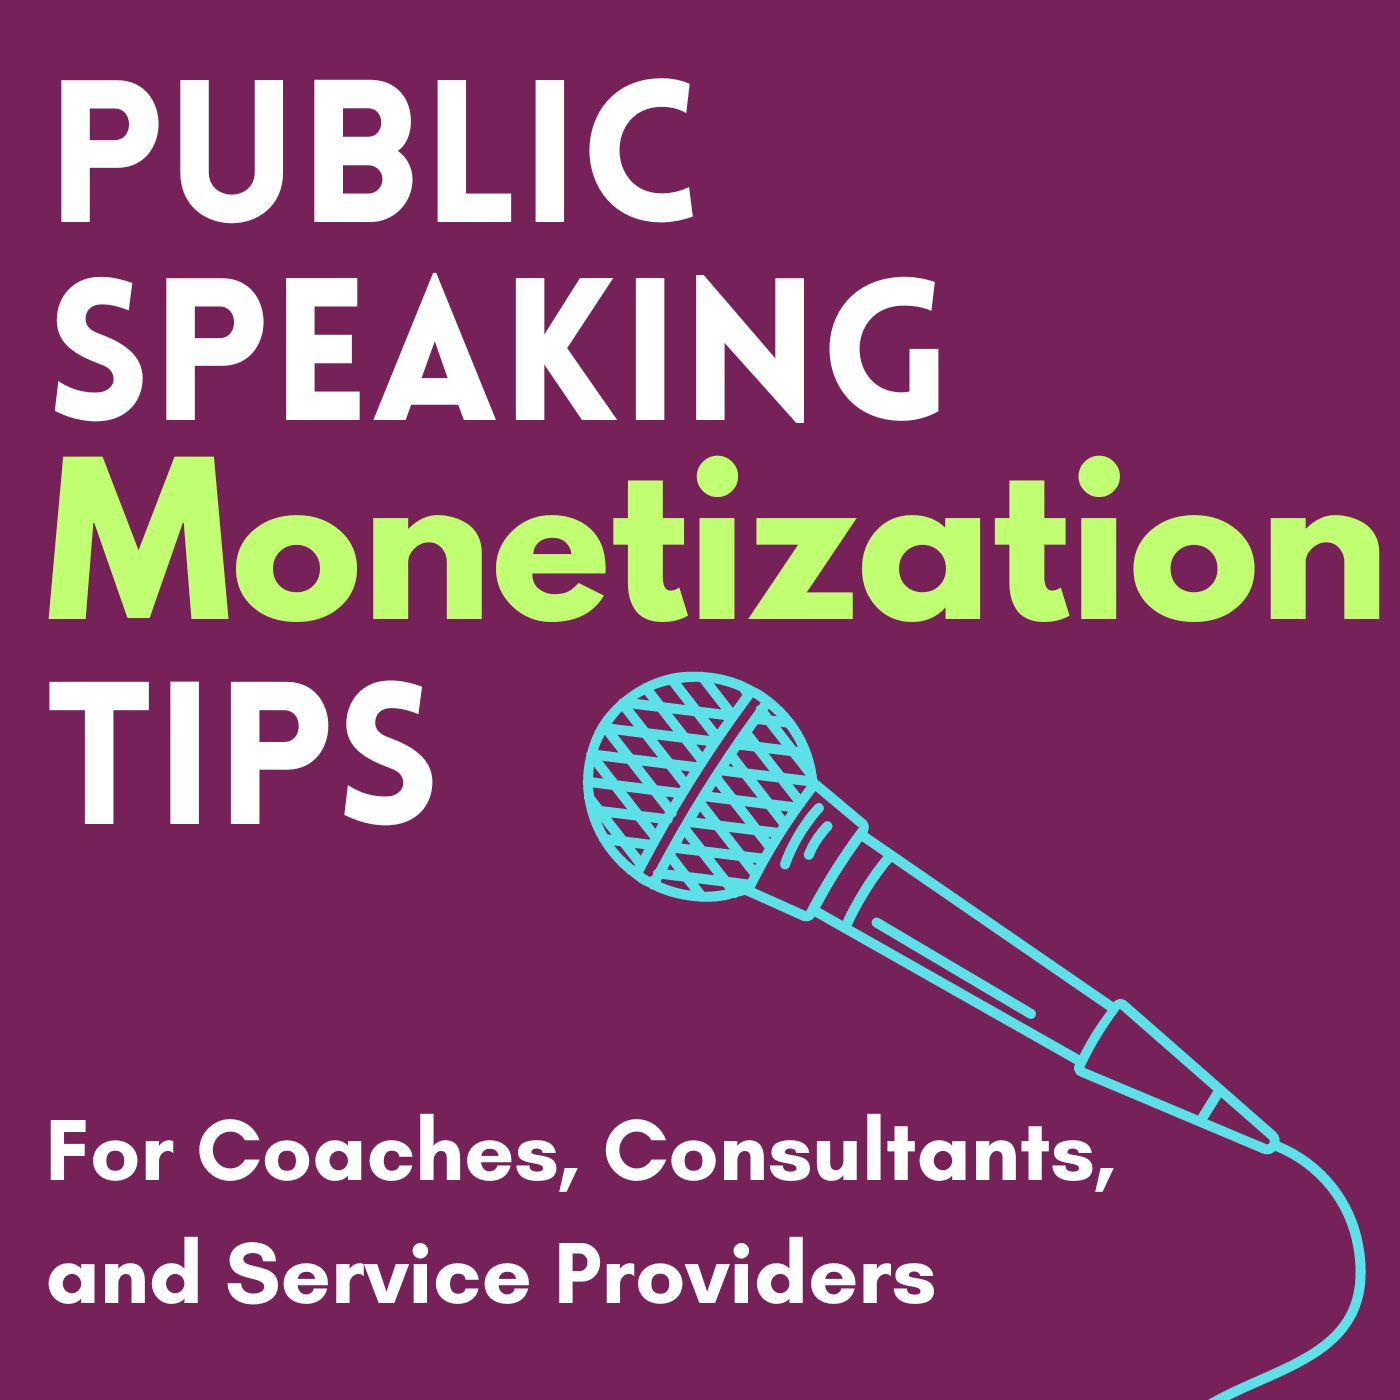 Artwork for Public Speaking Monetization Tips for Coaches, Consultants, Entrepreneurs and Service Providers